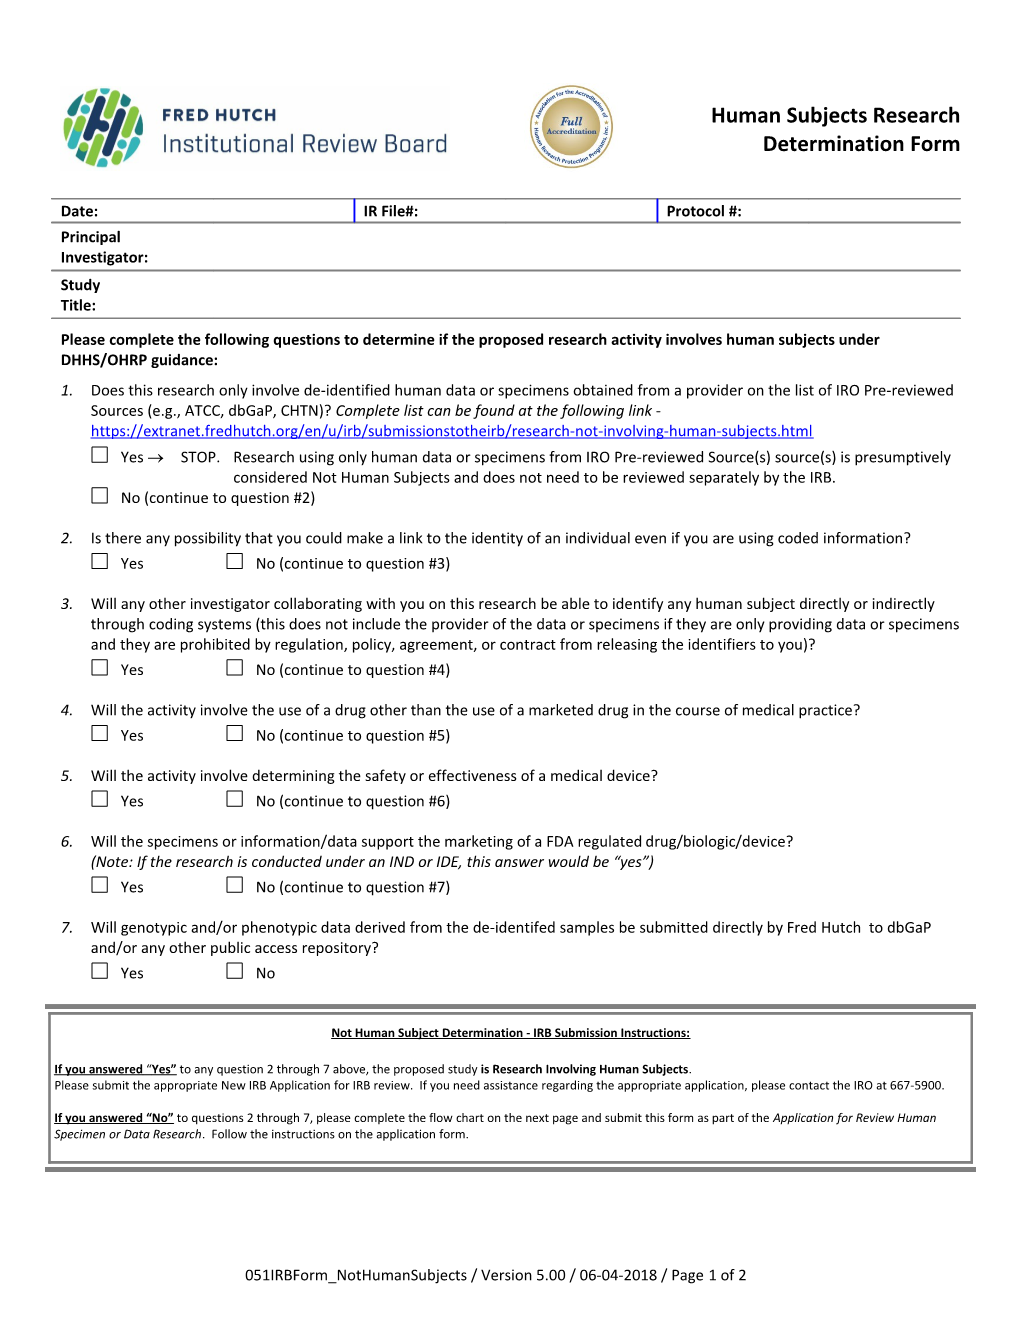 IRB Form Human Subjects Research Determination Form